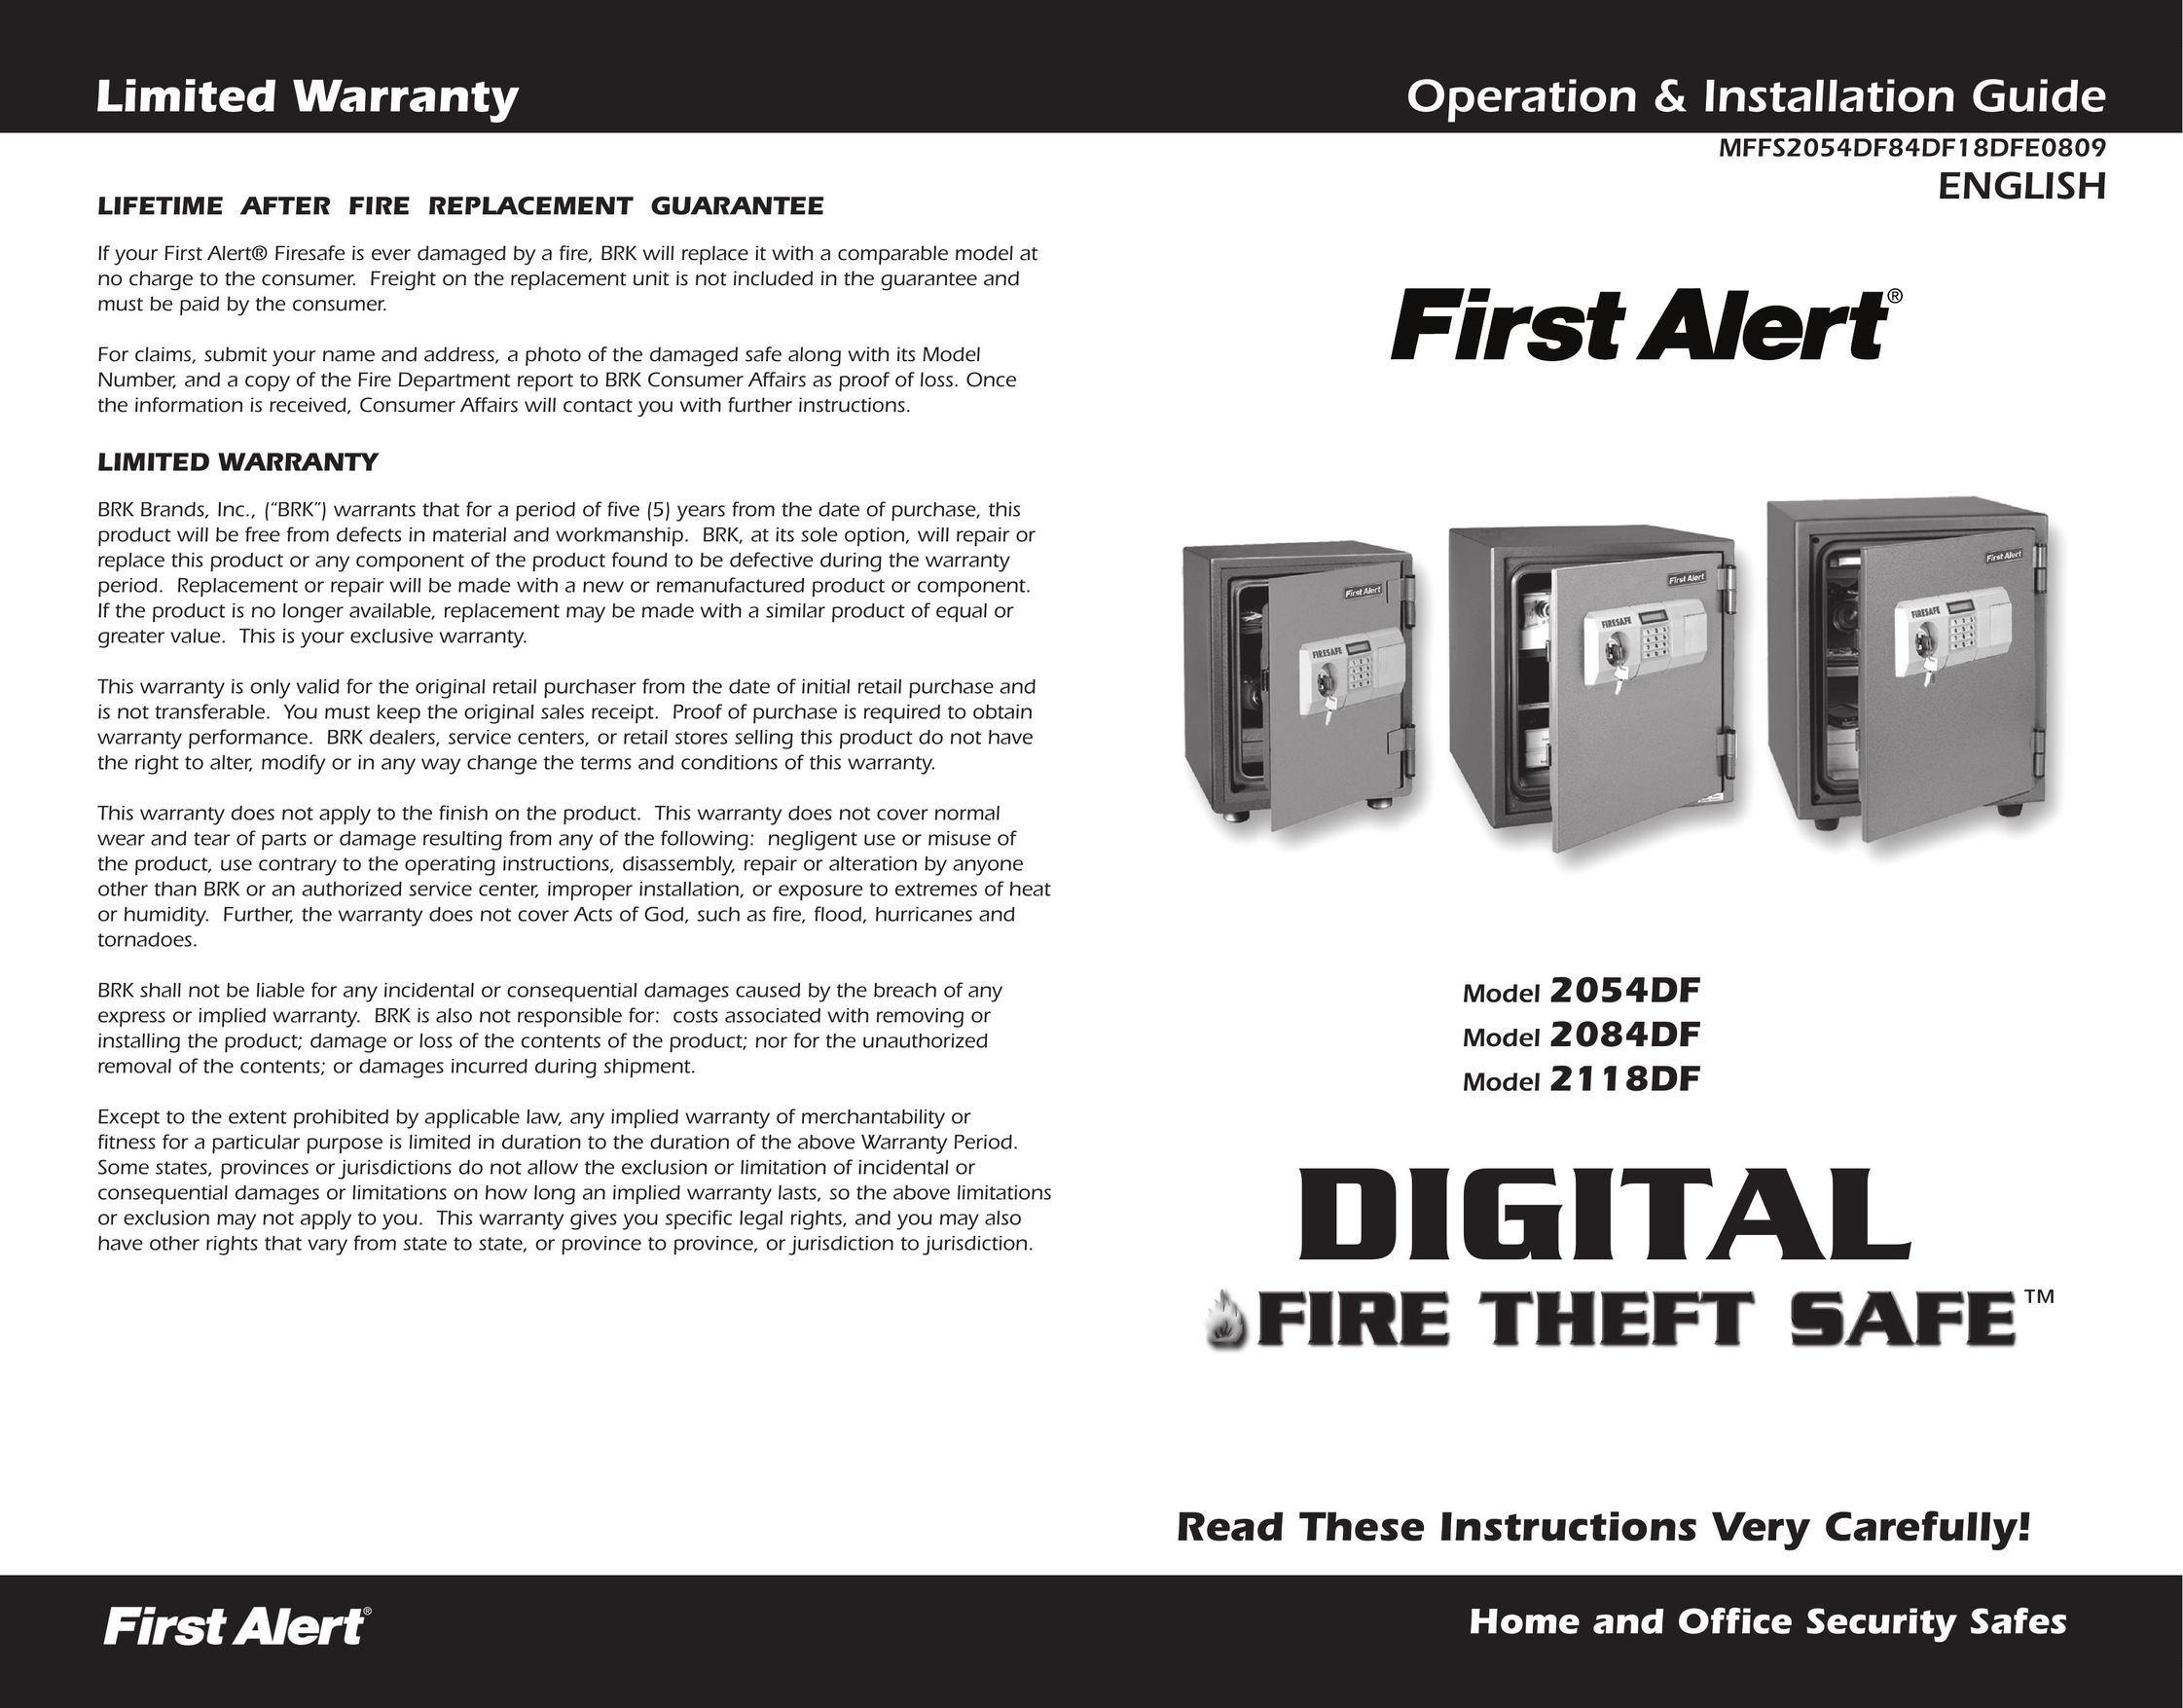 First Alert 2084DF Home Security System User Manual